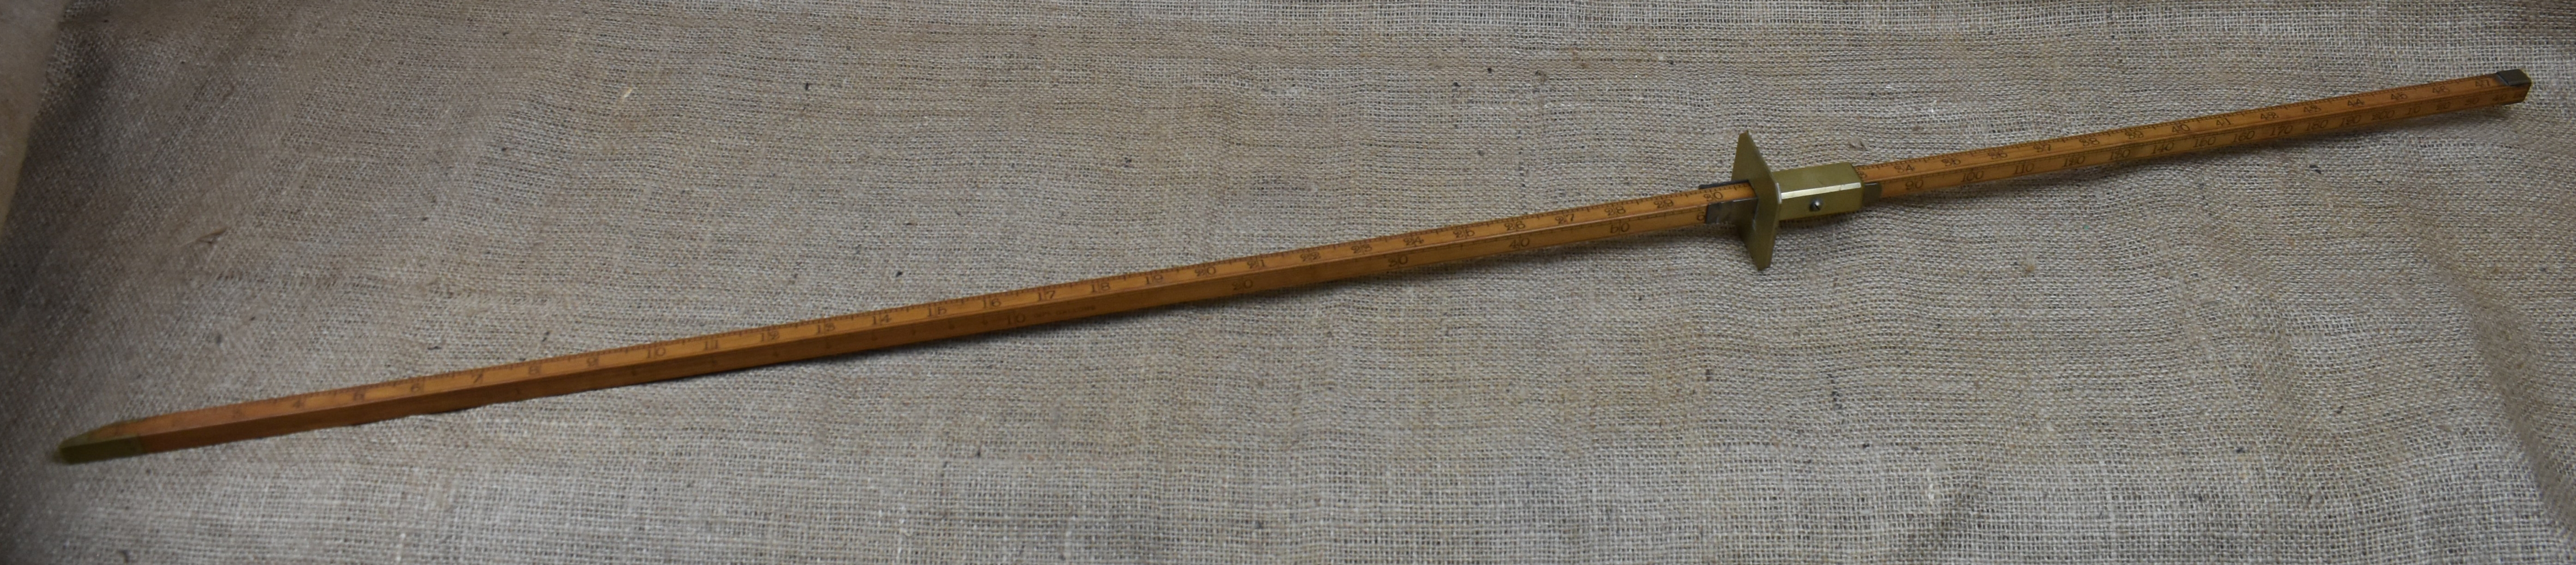 Barthes Roberts Ltd, London, 48" Bung Rod, for Imperial Area and Imperial Gallons.